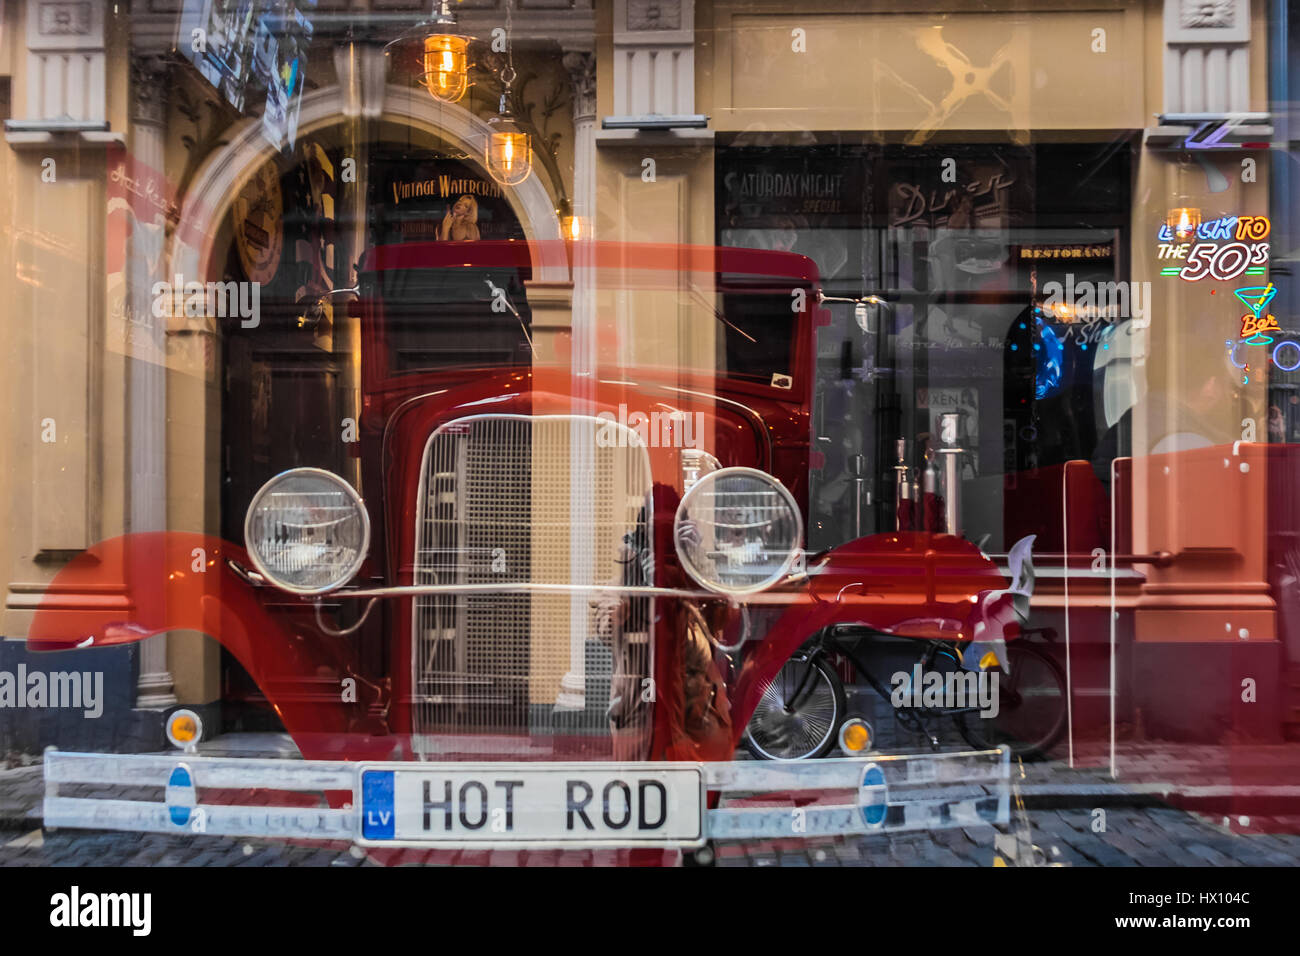 Riga, Latvia - March 20, 2017: Hot Rod in american vintage bar with photorgapher and street reflections Stock Photo